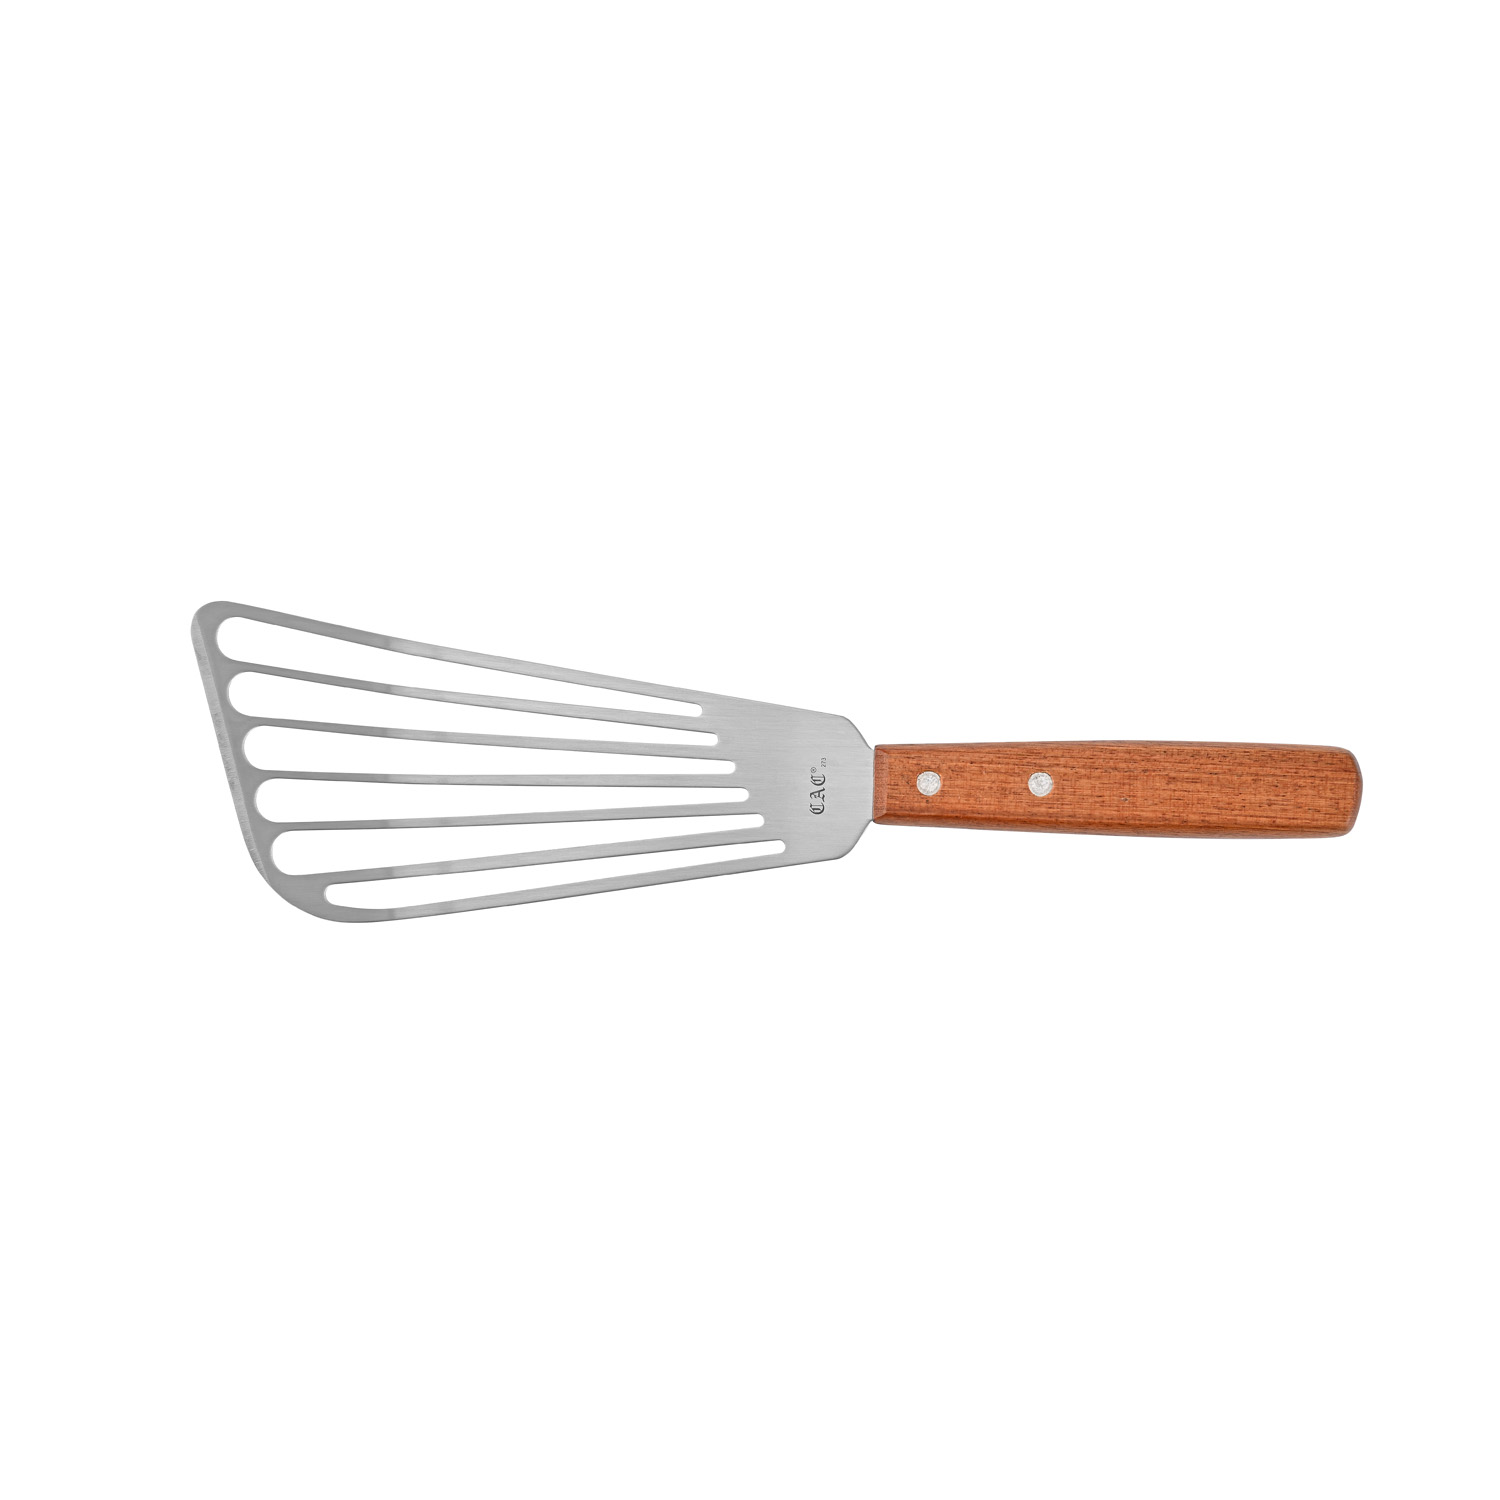 CAC China TNRW-SP73 Stainless Steel Spatula Slotted with Wood Handle 6-3/4"